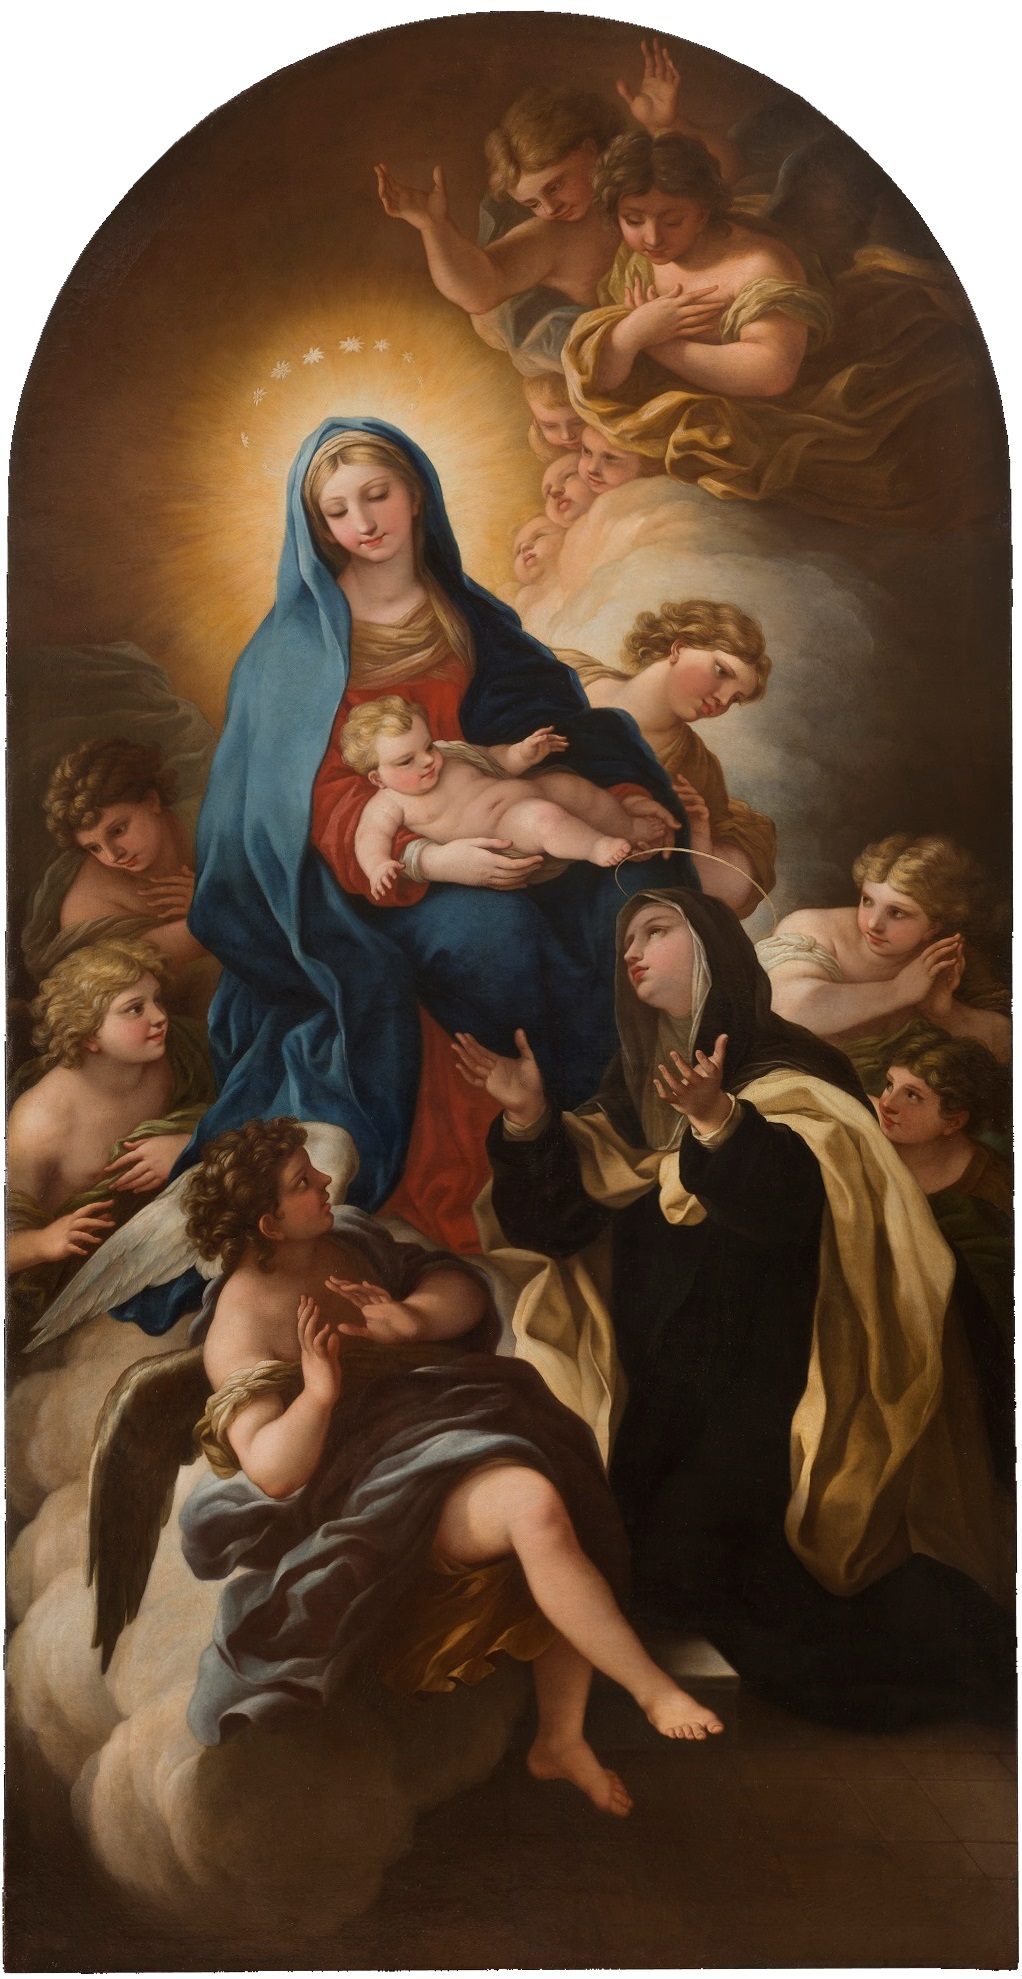 An image of the Virgin Mary holding the infant Jesus, surrounded by angels and other figures. Mary is dressed in blue and pink robes and is crowned with a glowing halo. Another robed, haloed figure is kneeled at her feet, looking up at her and Jesus with arms outstretched. The setting is astral and infused with golden light.